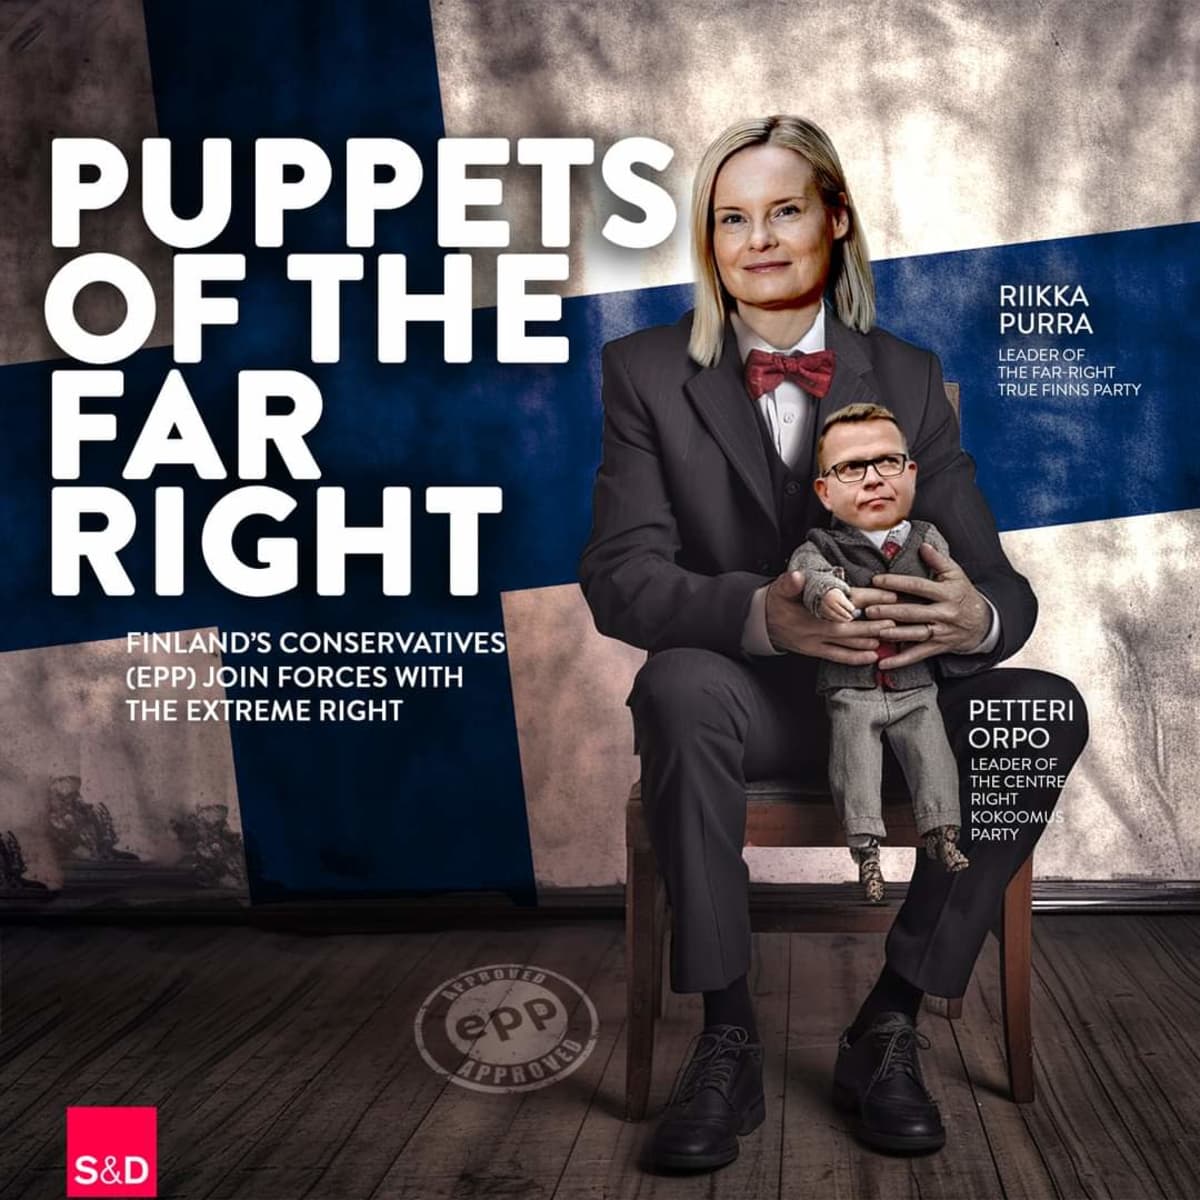 EU parliamentary group labels Finland's PM-designate Orpo "puppet of the  far right" | News | Yle Uutiset